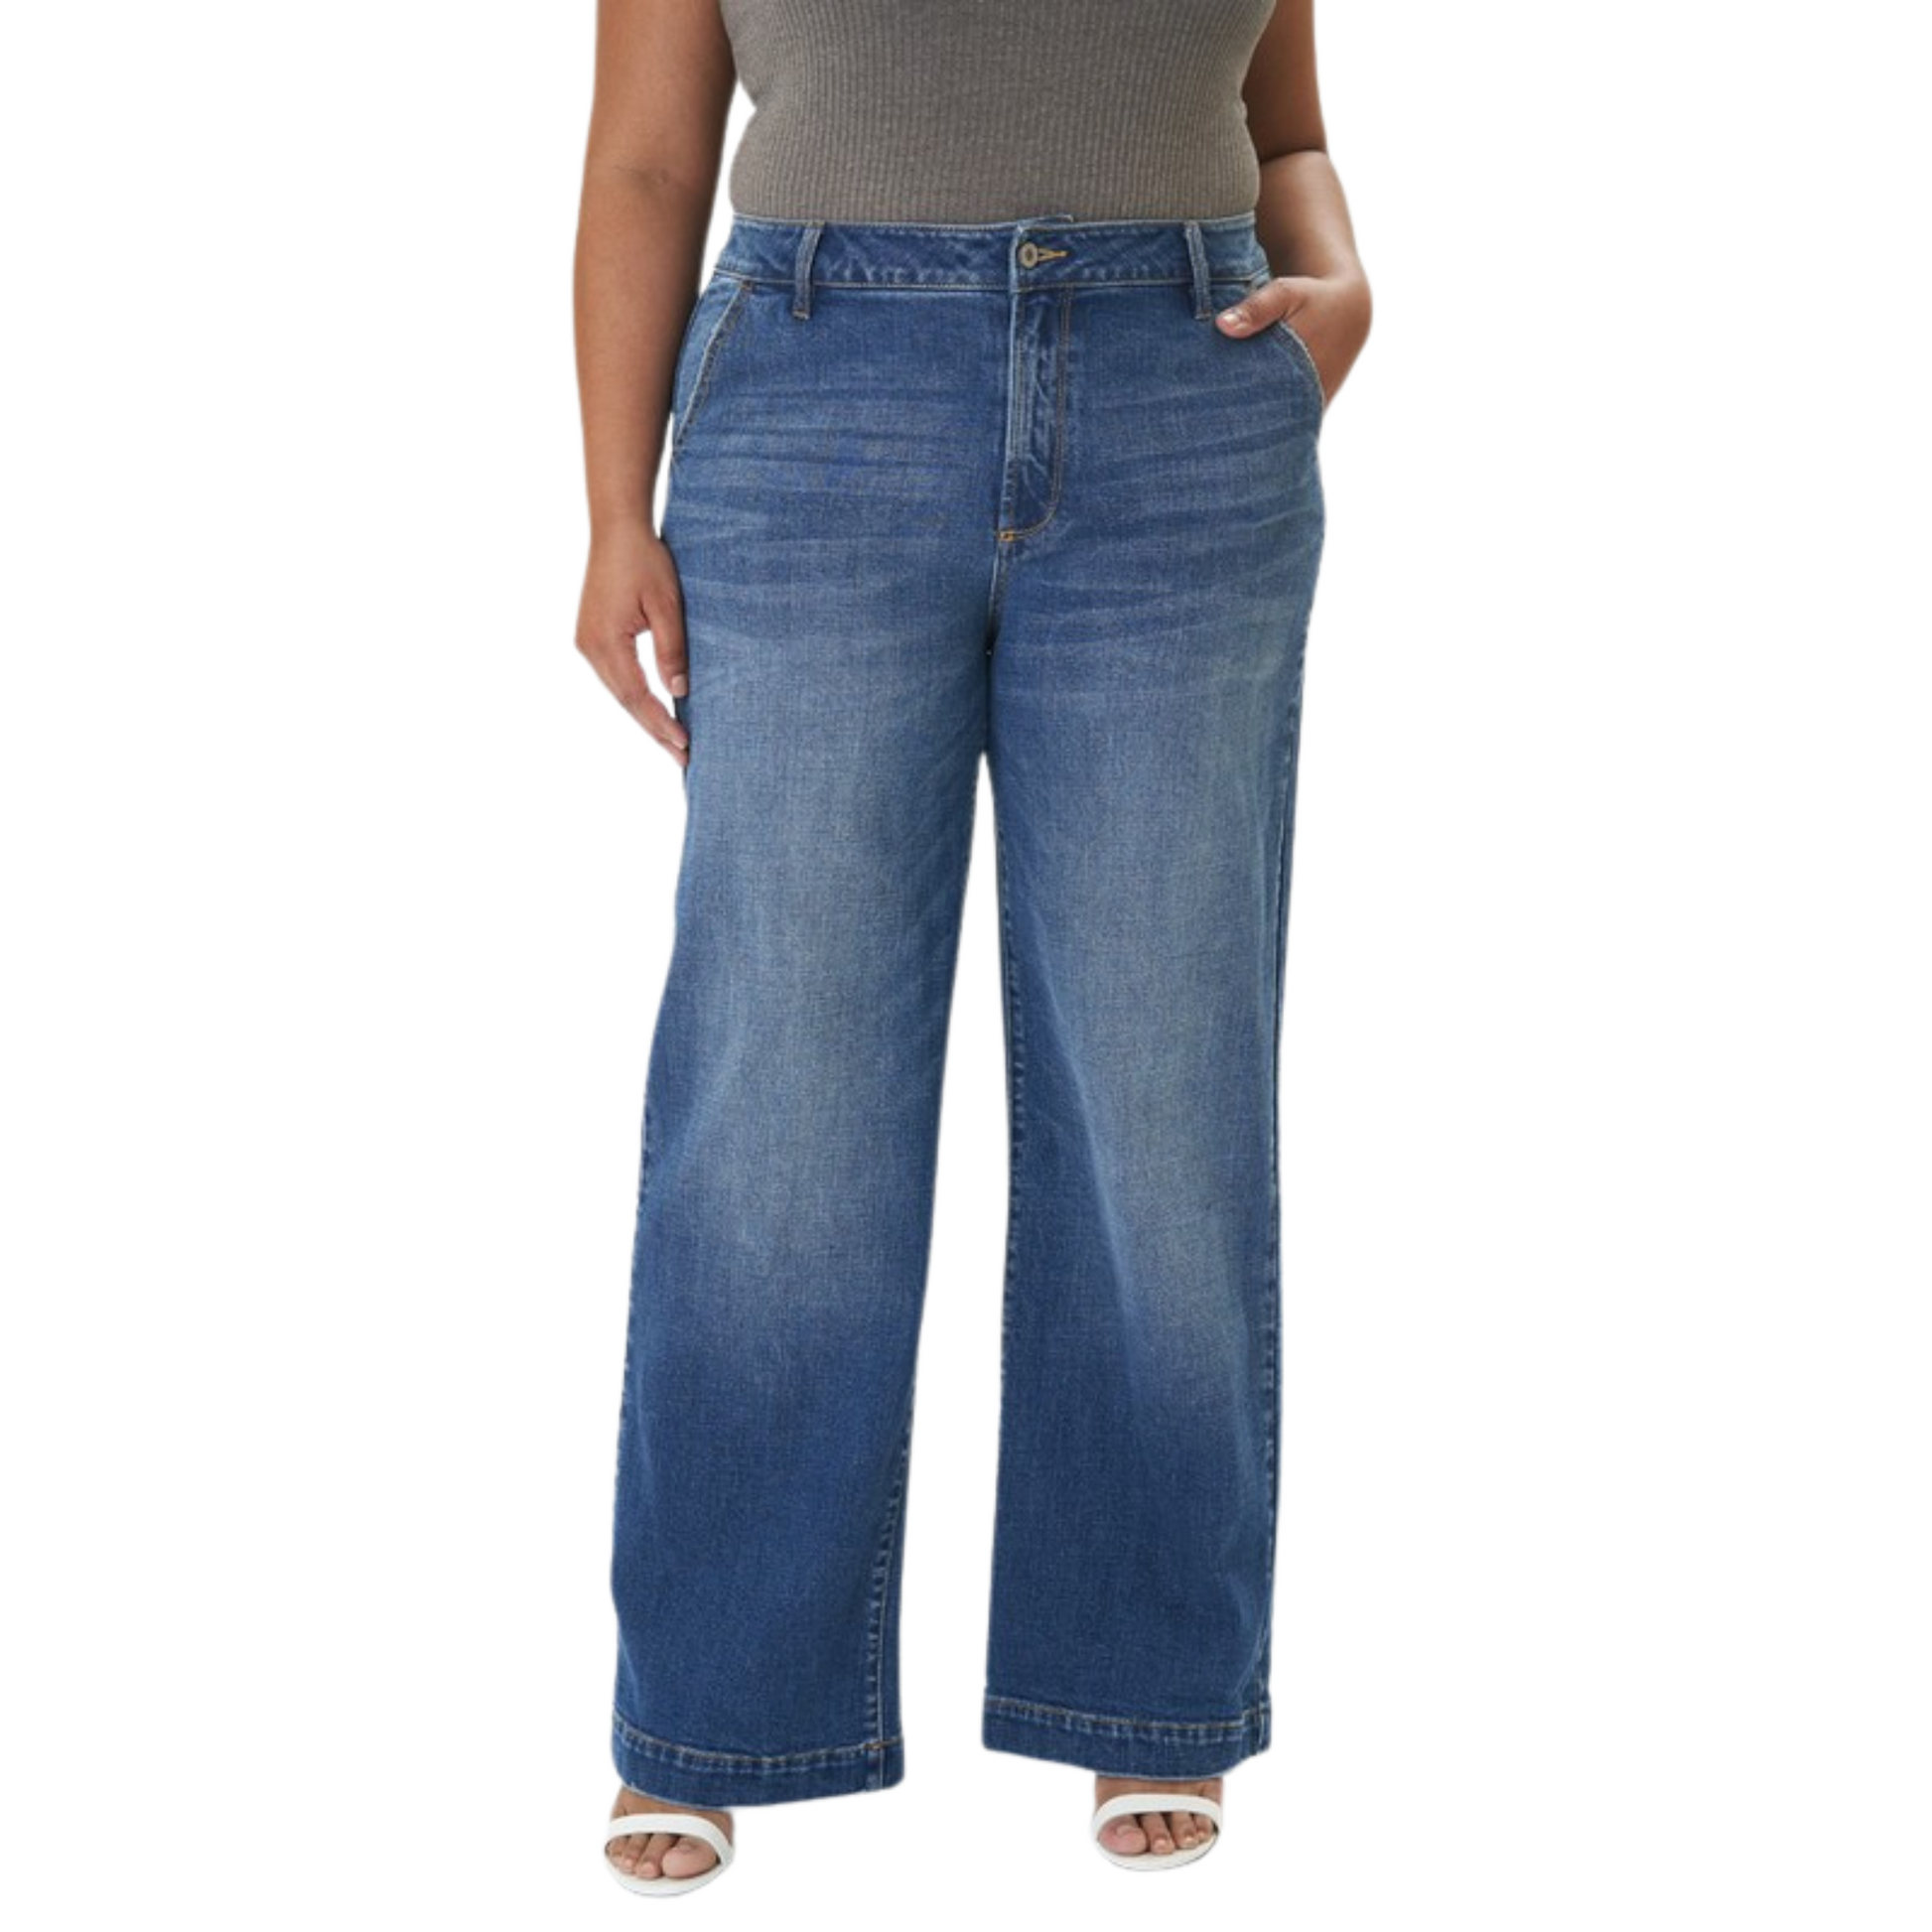 Our High-Rise Wide Leg Jeans are designed for a timeless look and timeless feel. The medium wash provides a retro twist that will be sure to stand out. Featuring a flattering high-rise fit and fashionable wide leg, these jeans are the perfect choice for any wardrobe.